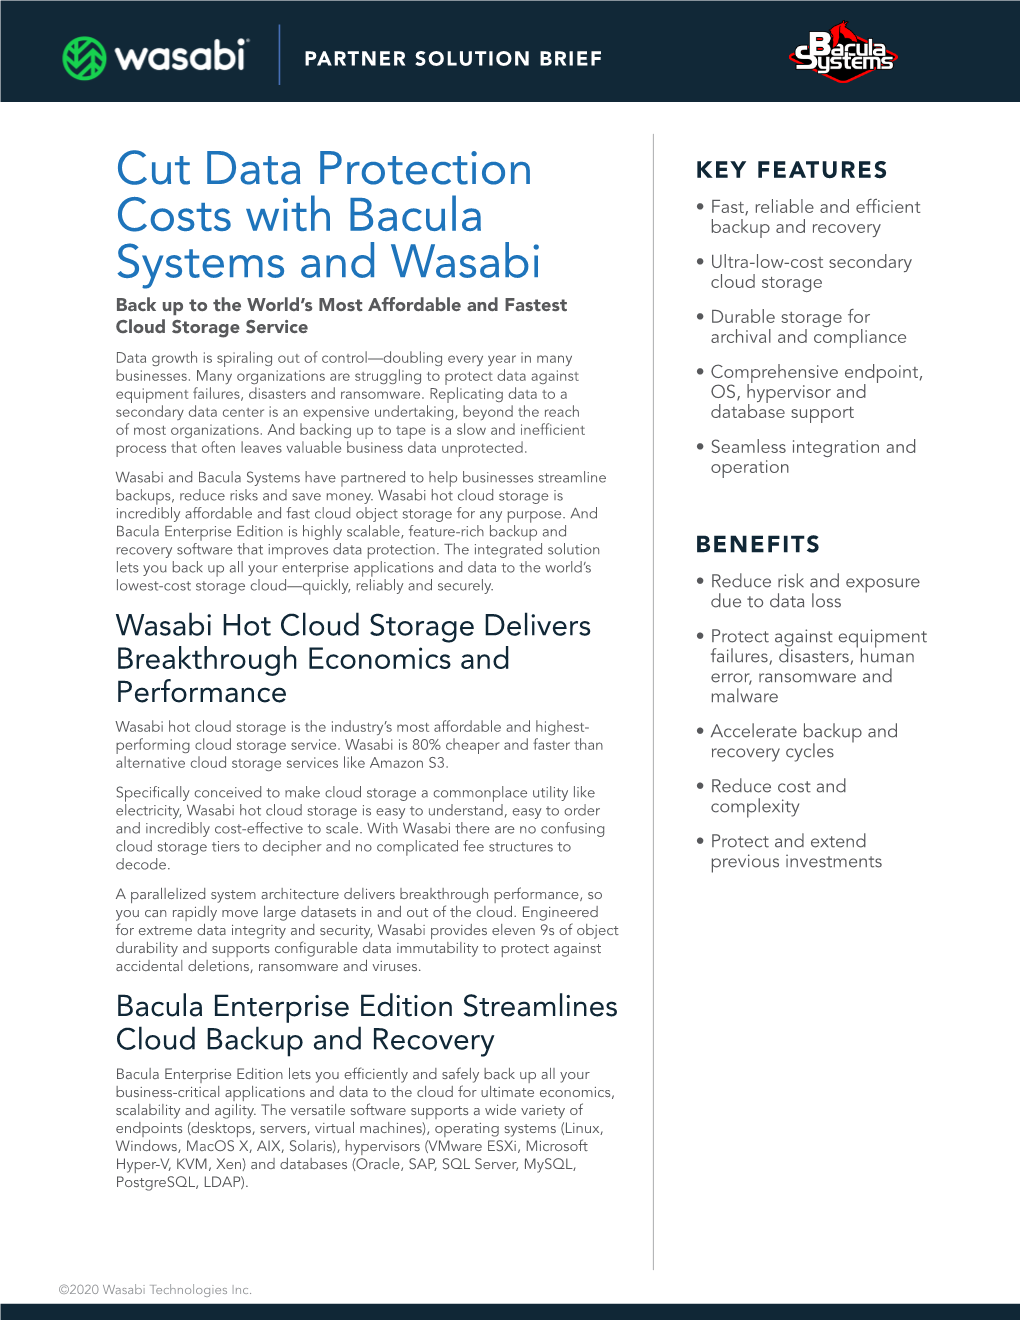 Cut Data Protection Costs with Bacula Systems and Wasabi